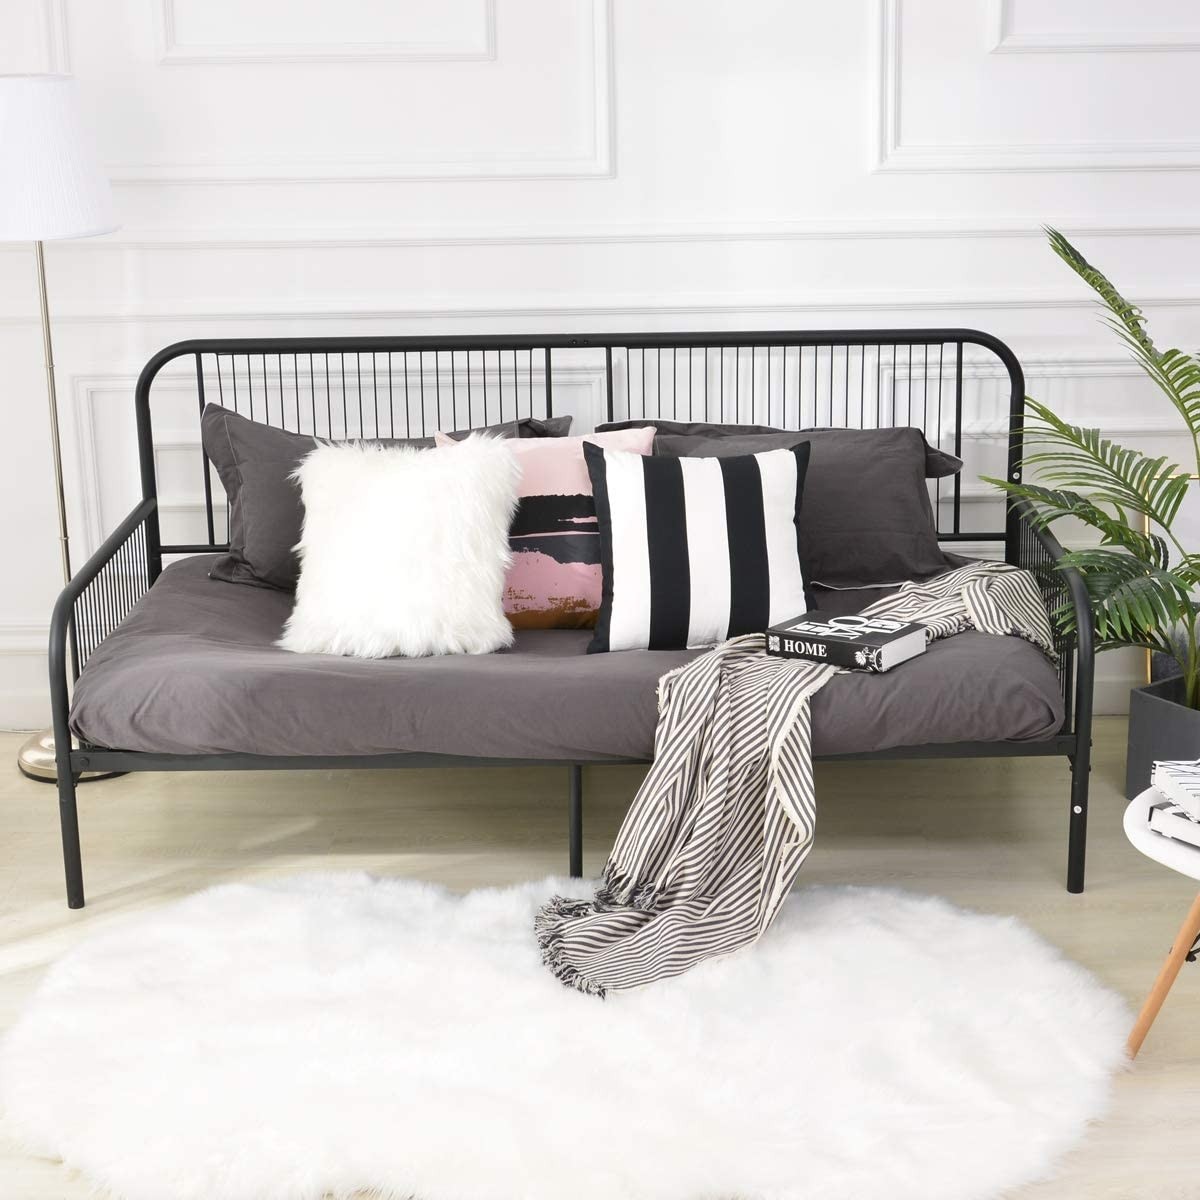 Homy casa daybed frame twin size metal platform day bed